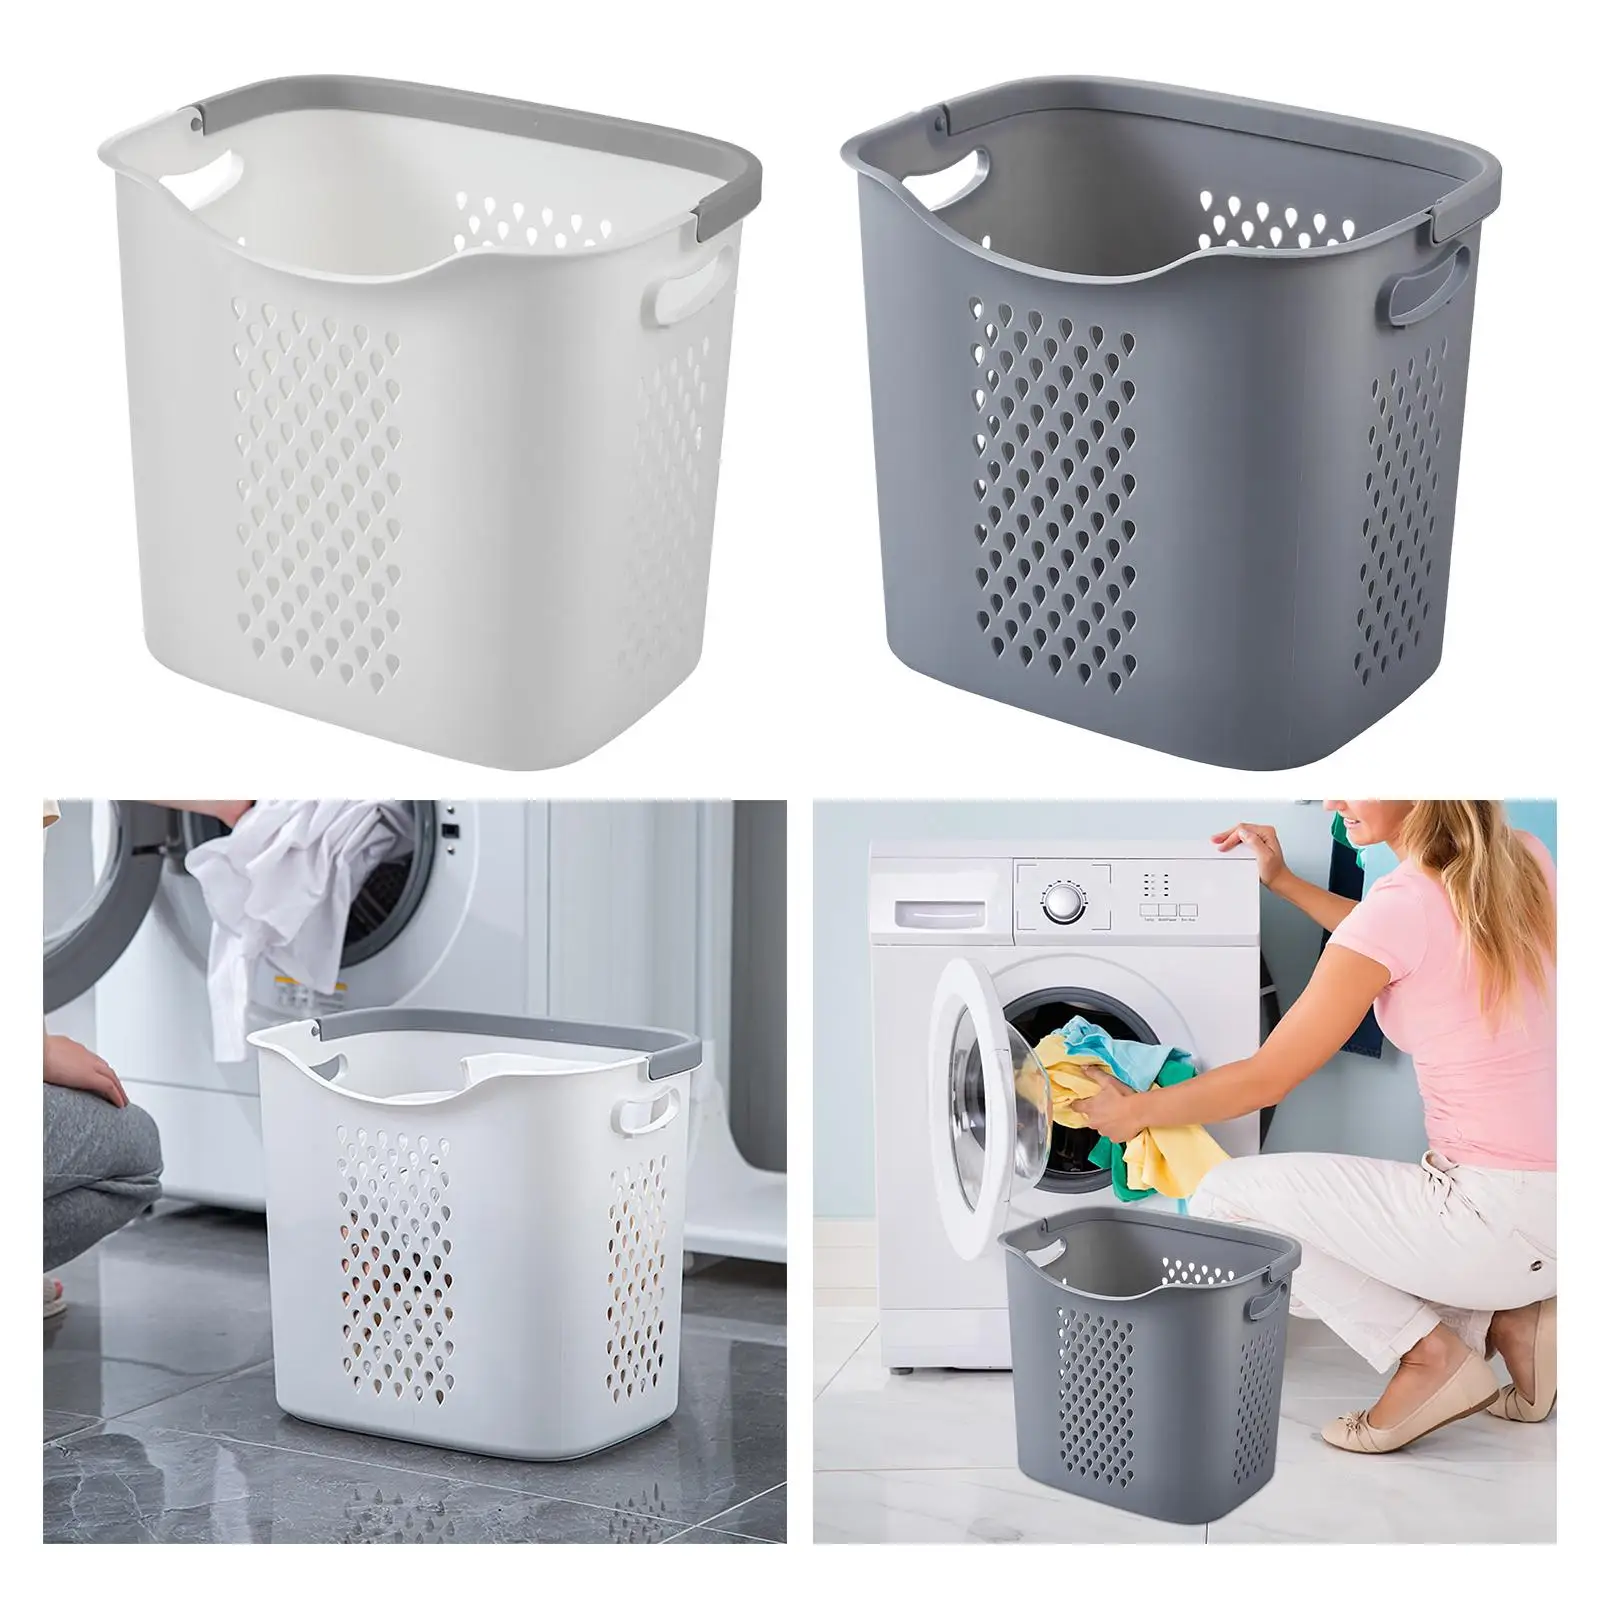 Laundry Basket Toy Storage Bins Organizer Clothing Storage Bucket Dirty Clothes Basket for Living Room Bedroom Home Shoes Toys